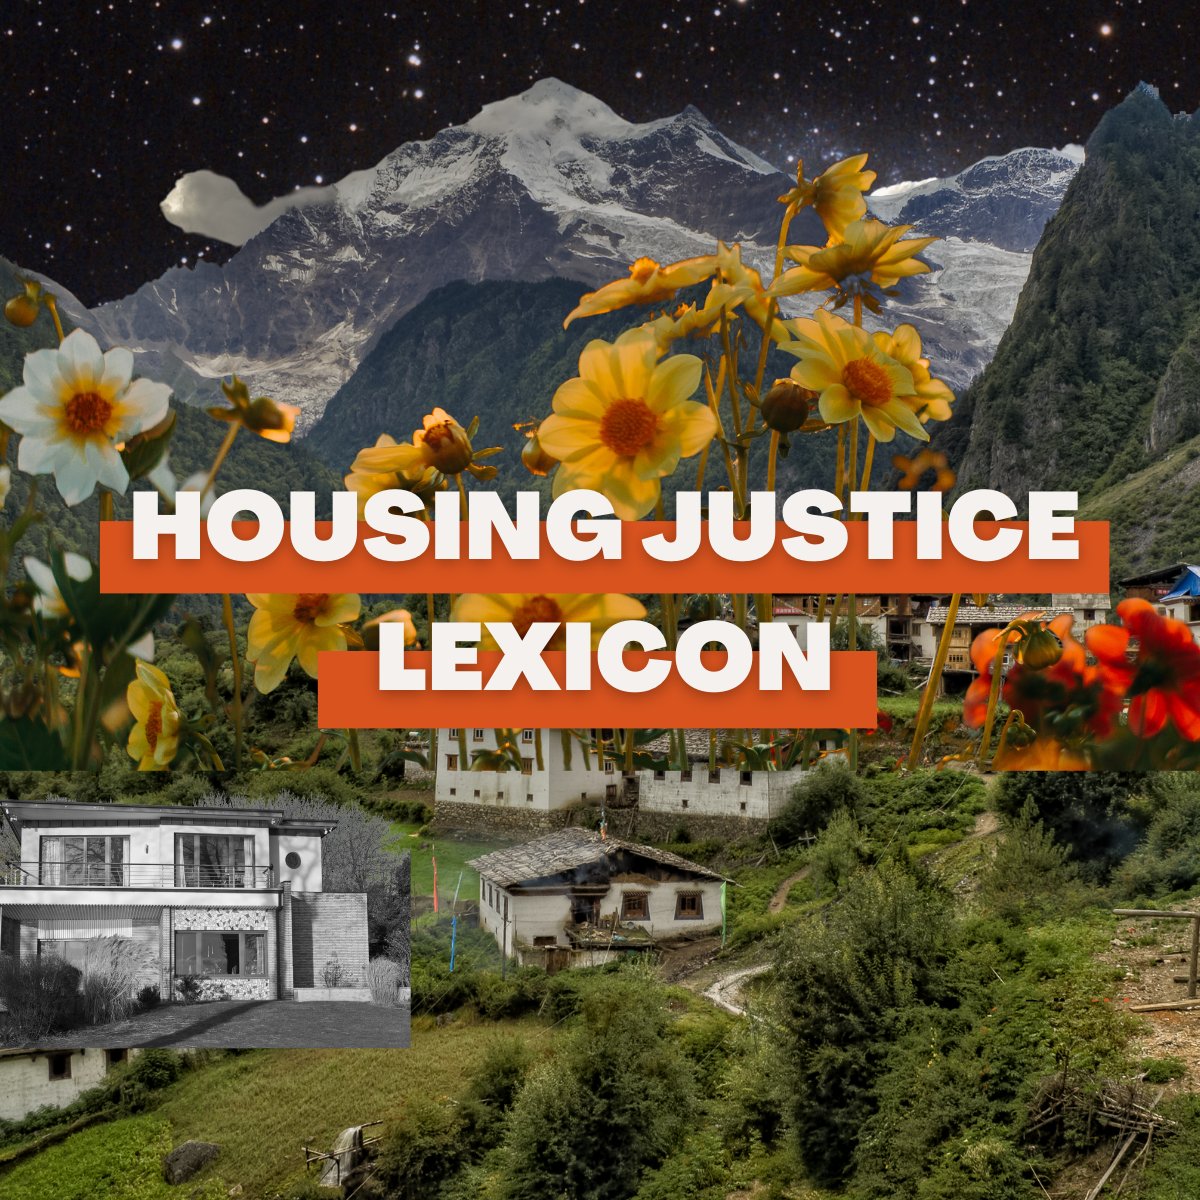 During #HousingFuturesMonth, a shared language that reflects our bold ideas for Housing Justice is critical. The Housing Justice Lexicon offers definitions for these terms. Download it on our Housing Futures portal and share! plcylk.org/hfm-portal